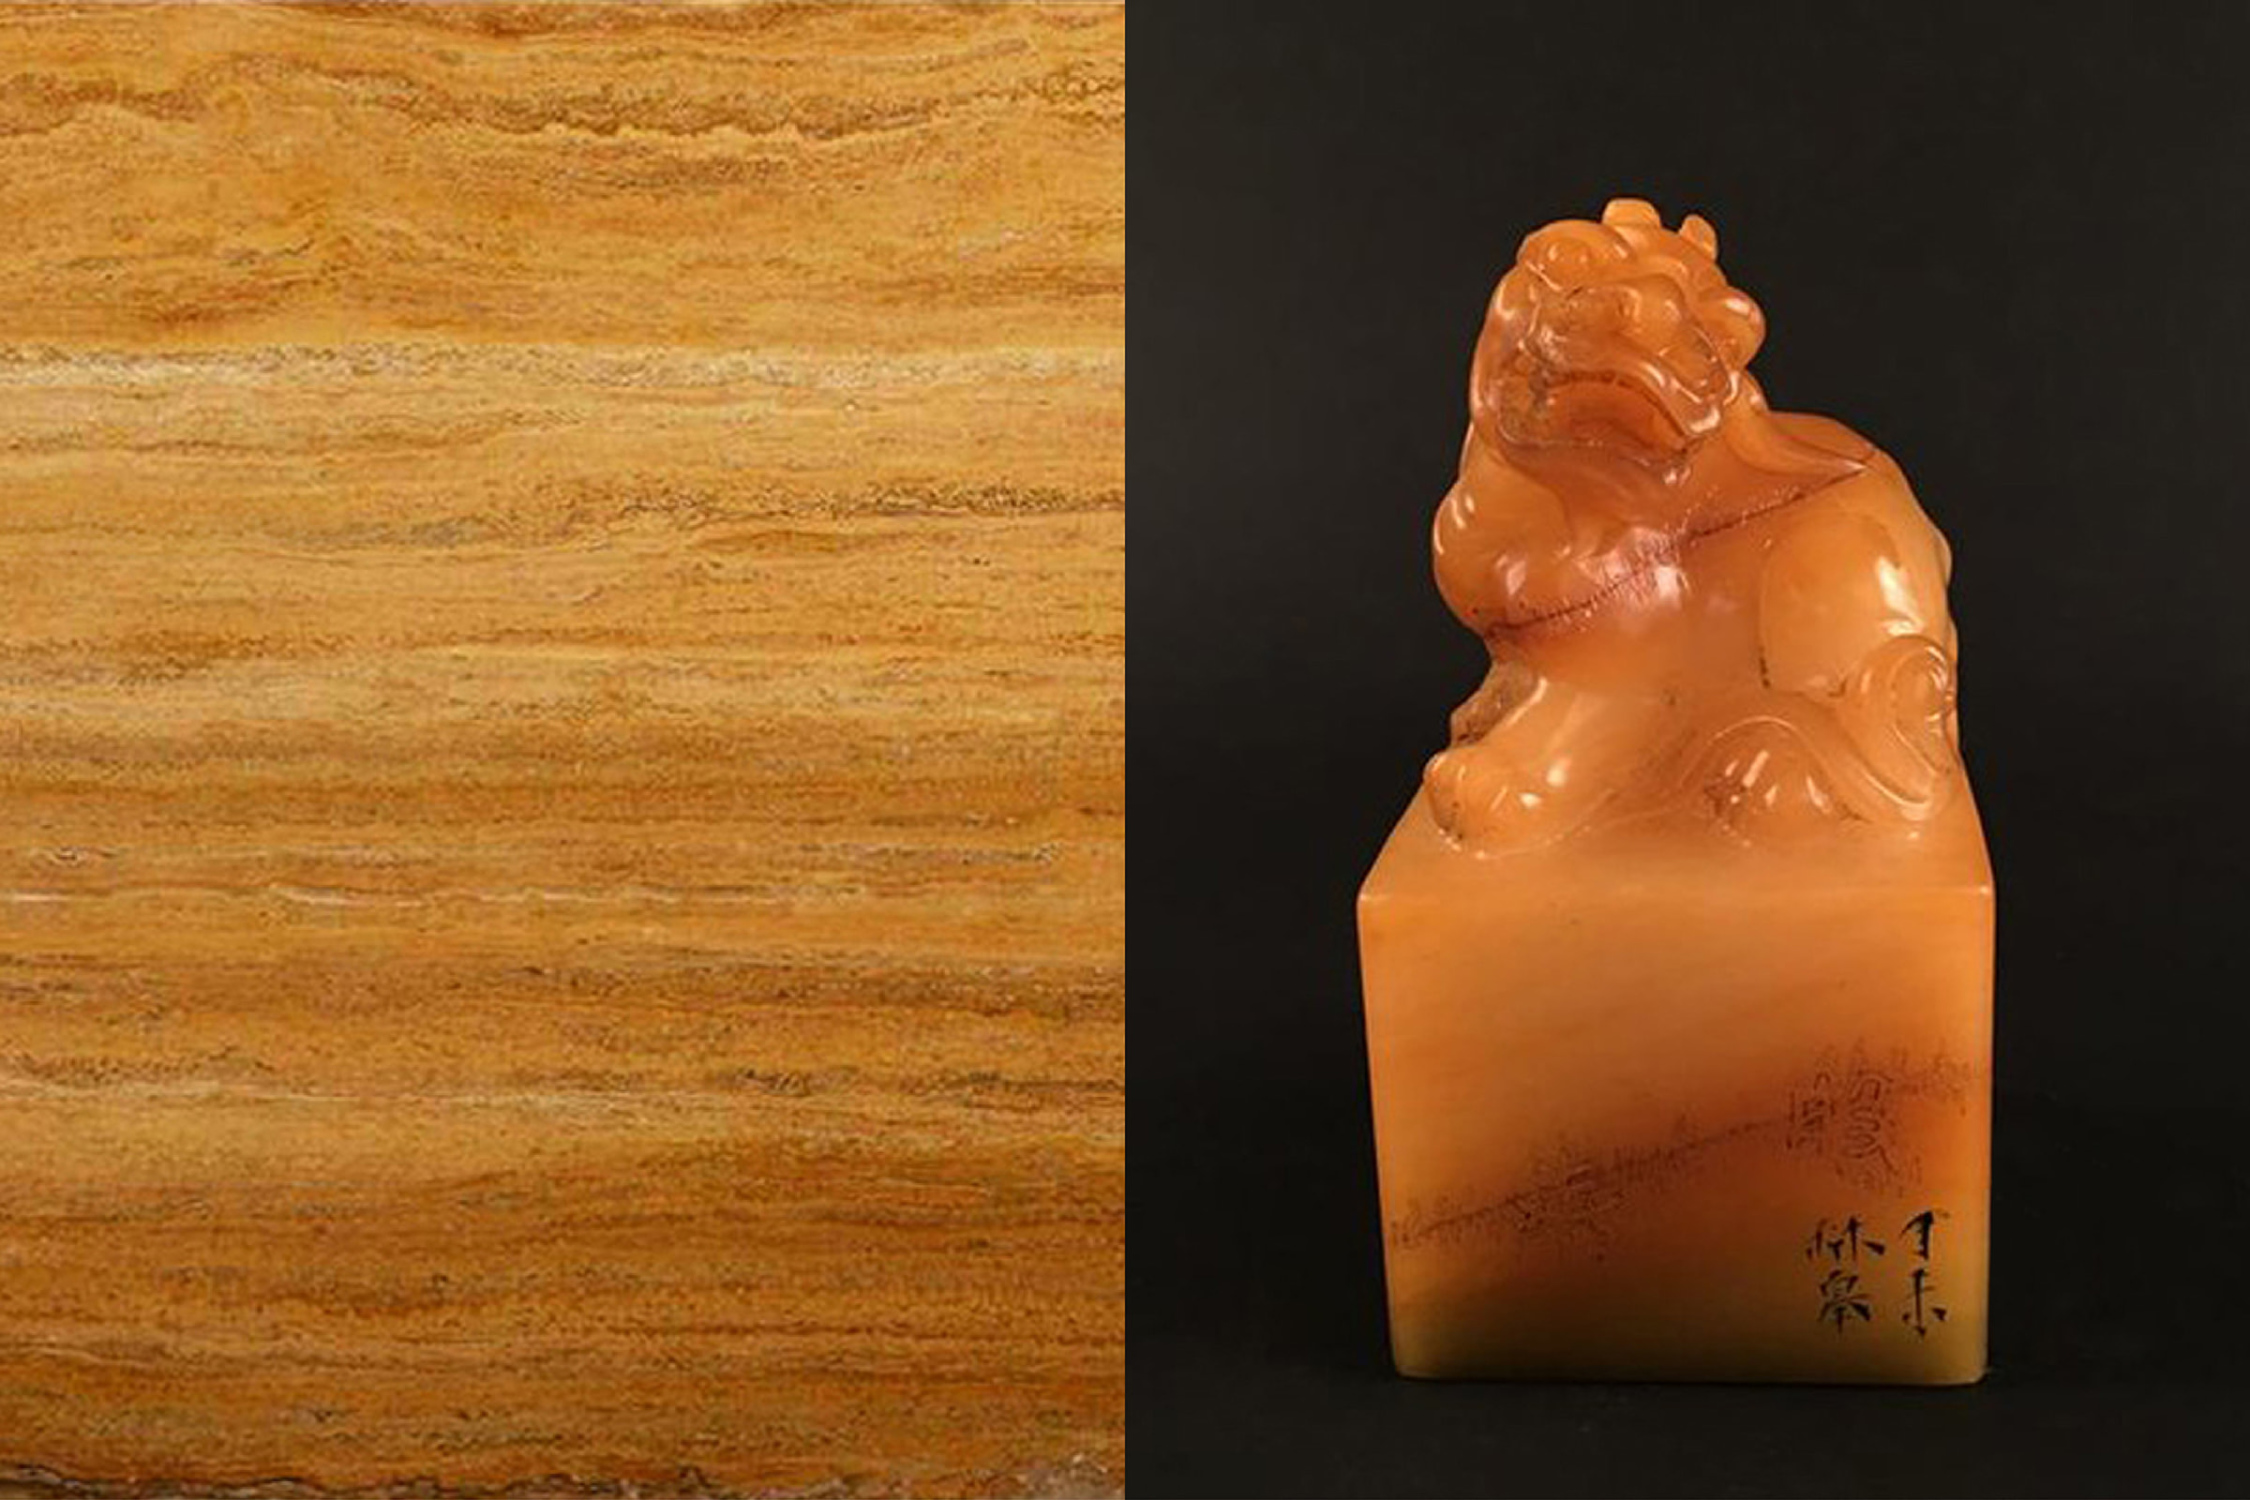 An image of Chinese Golden Travertine and a Shoushan stone seal.